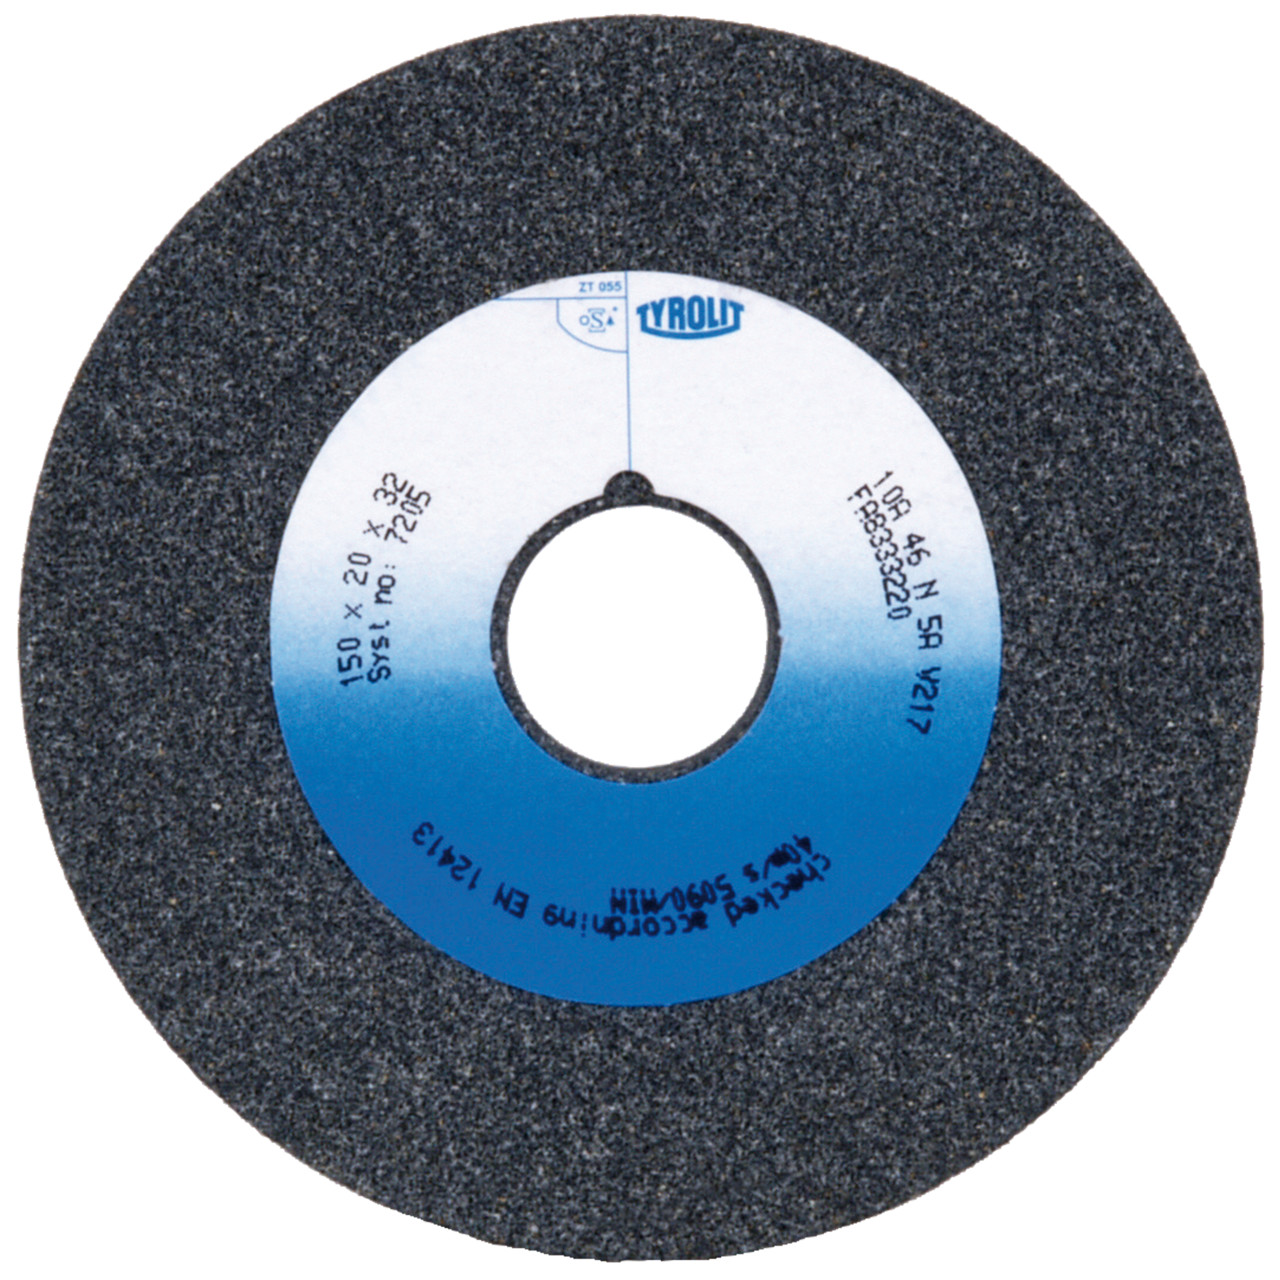 TYROLIT conventional ceramic grinding wheels DxDxH 200x32x51 For unalloyed and low-alloy steels, shape: 1, Art. 675264